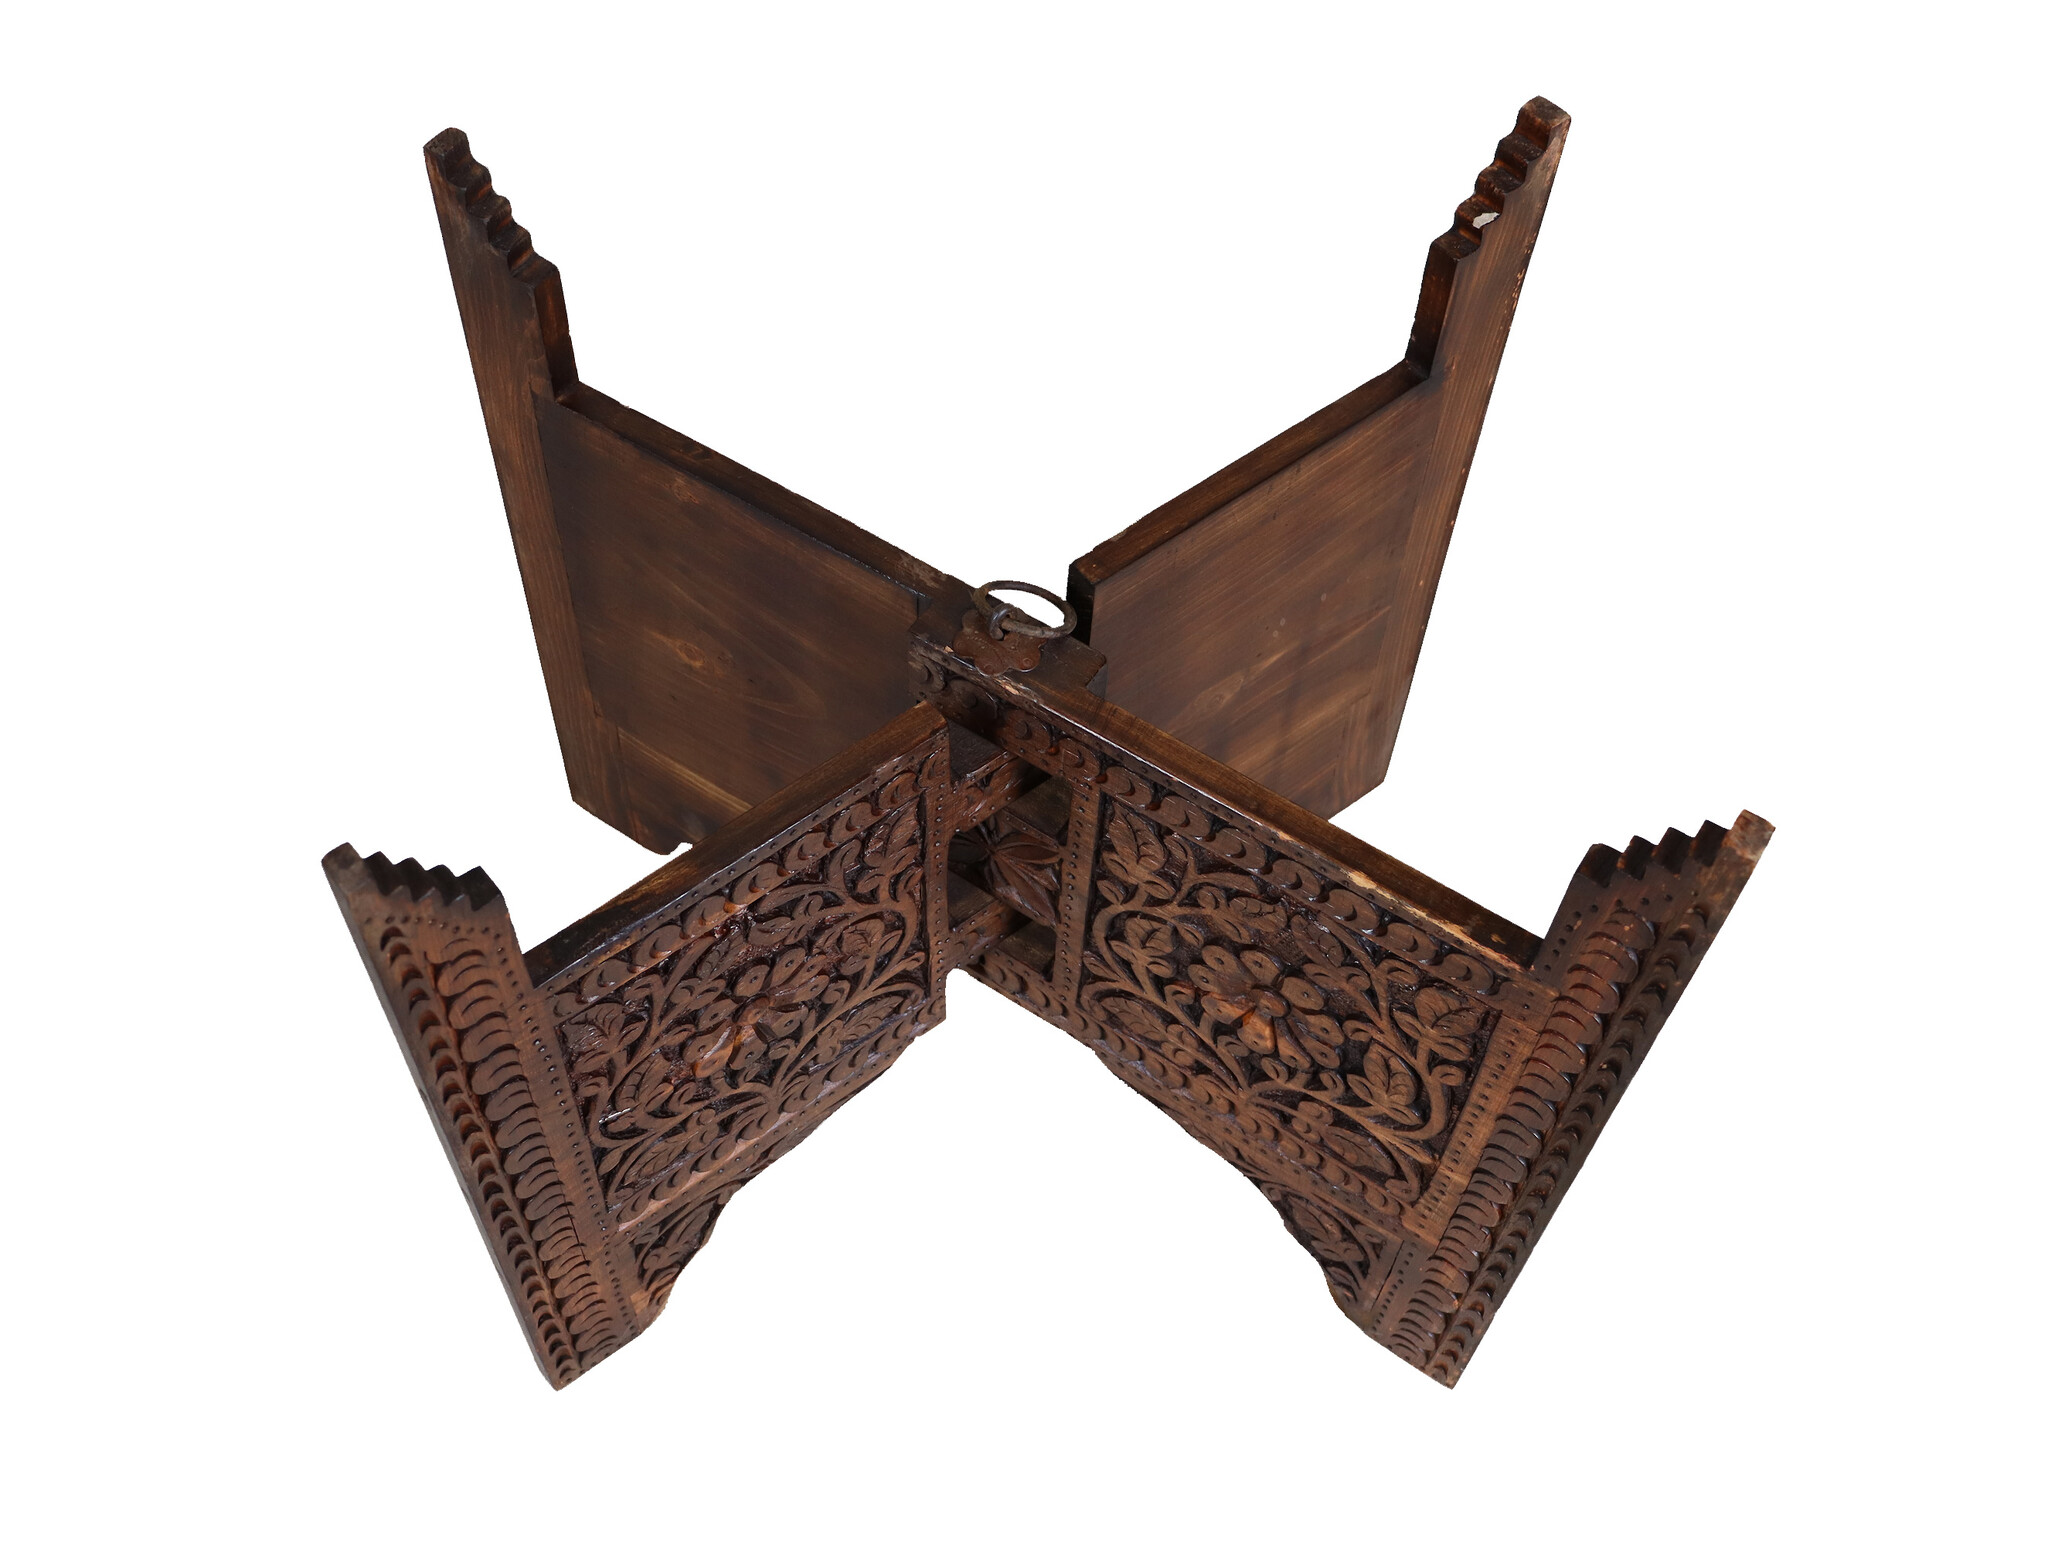 60 cm Ø Egyptian Moroccan Vintage India Table stand Folding Table Base Carved Wooden oriental Coffee H45 oriental Islamic style Coffee Tea Base NUR/60 A